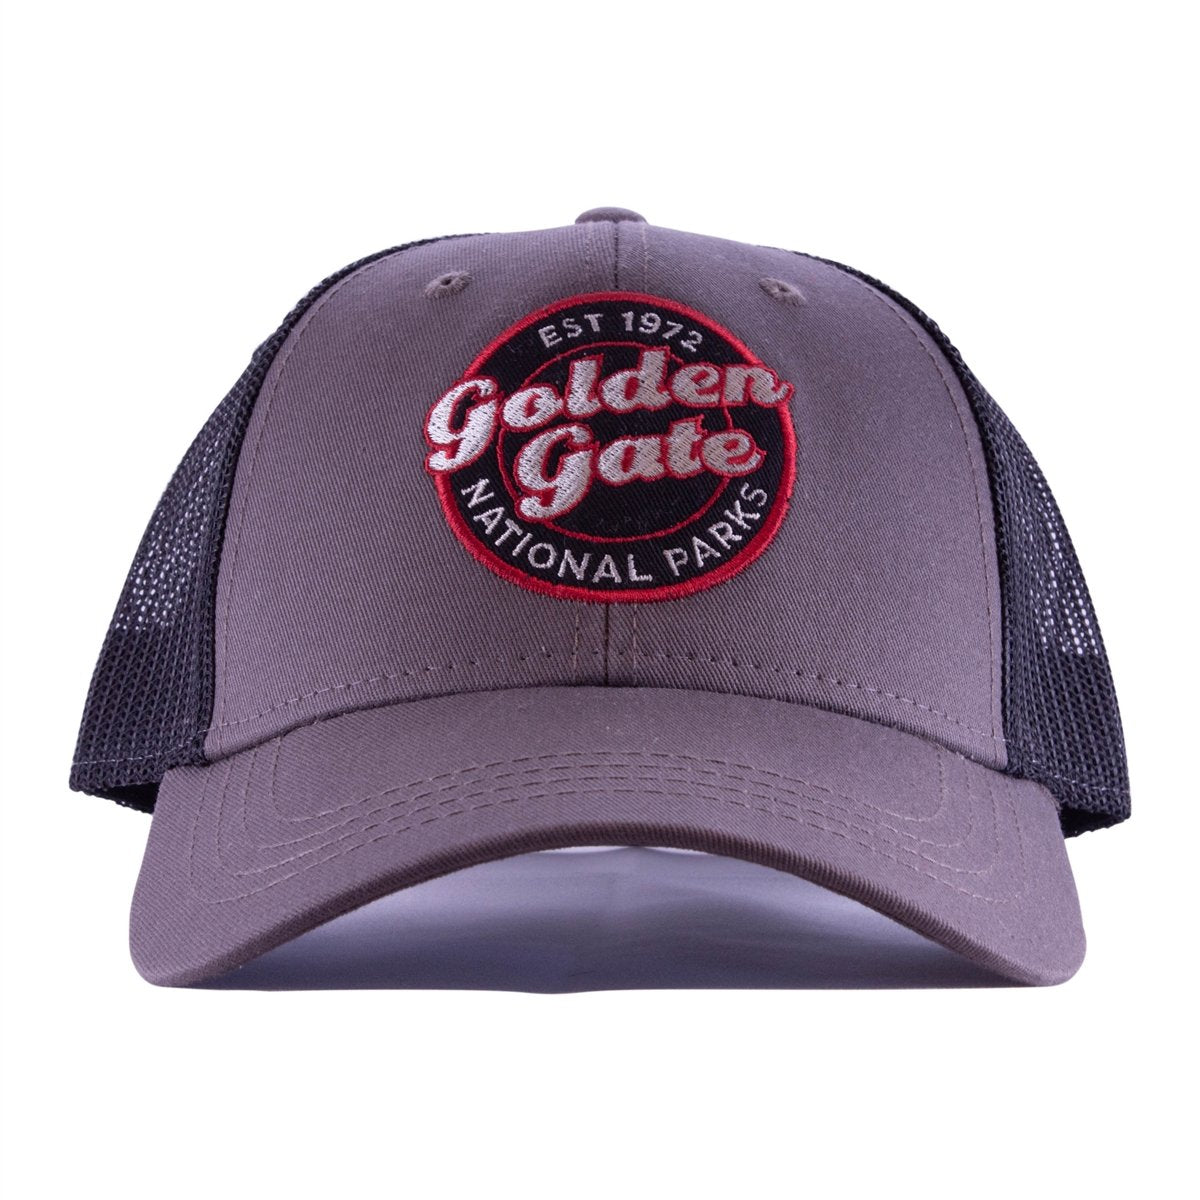 Grey and black mesh trucker cap with red, white, and black embroidered Golden Gate National Parks logo on front panels.